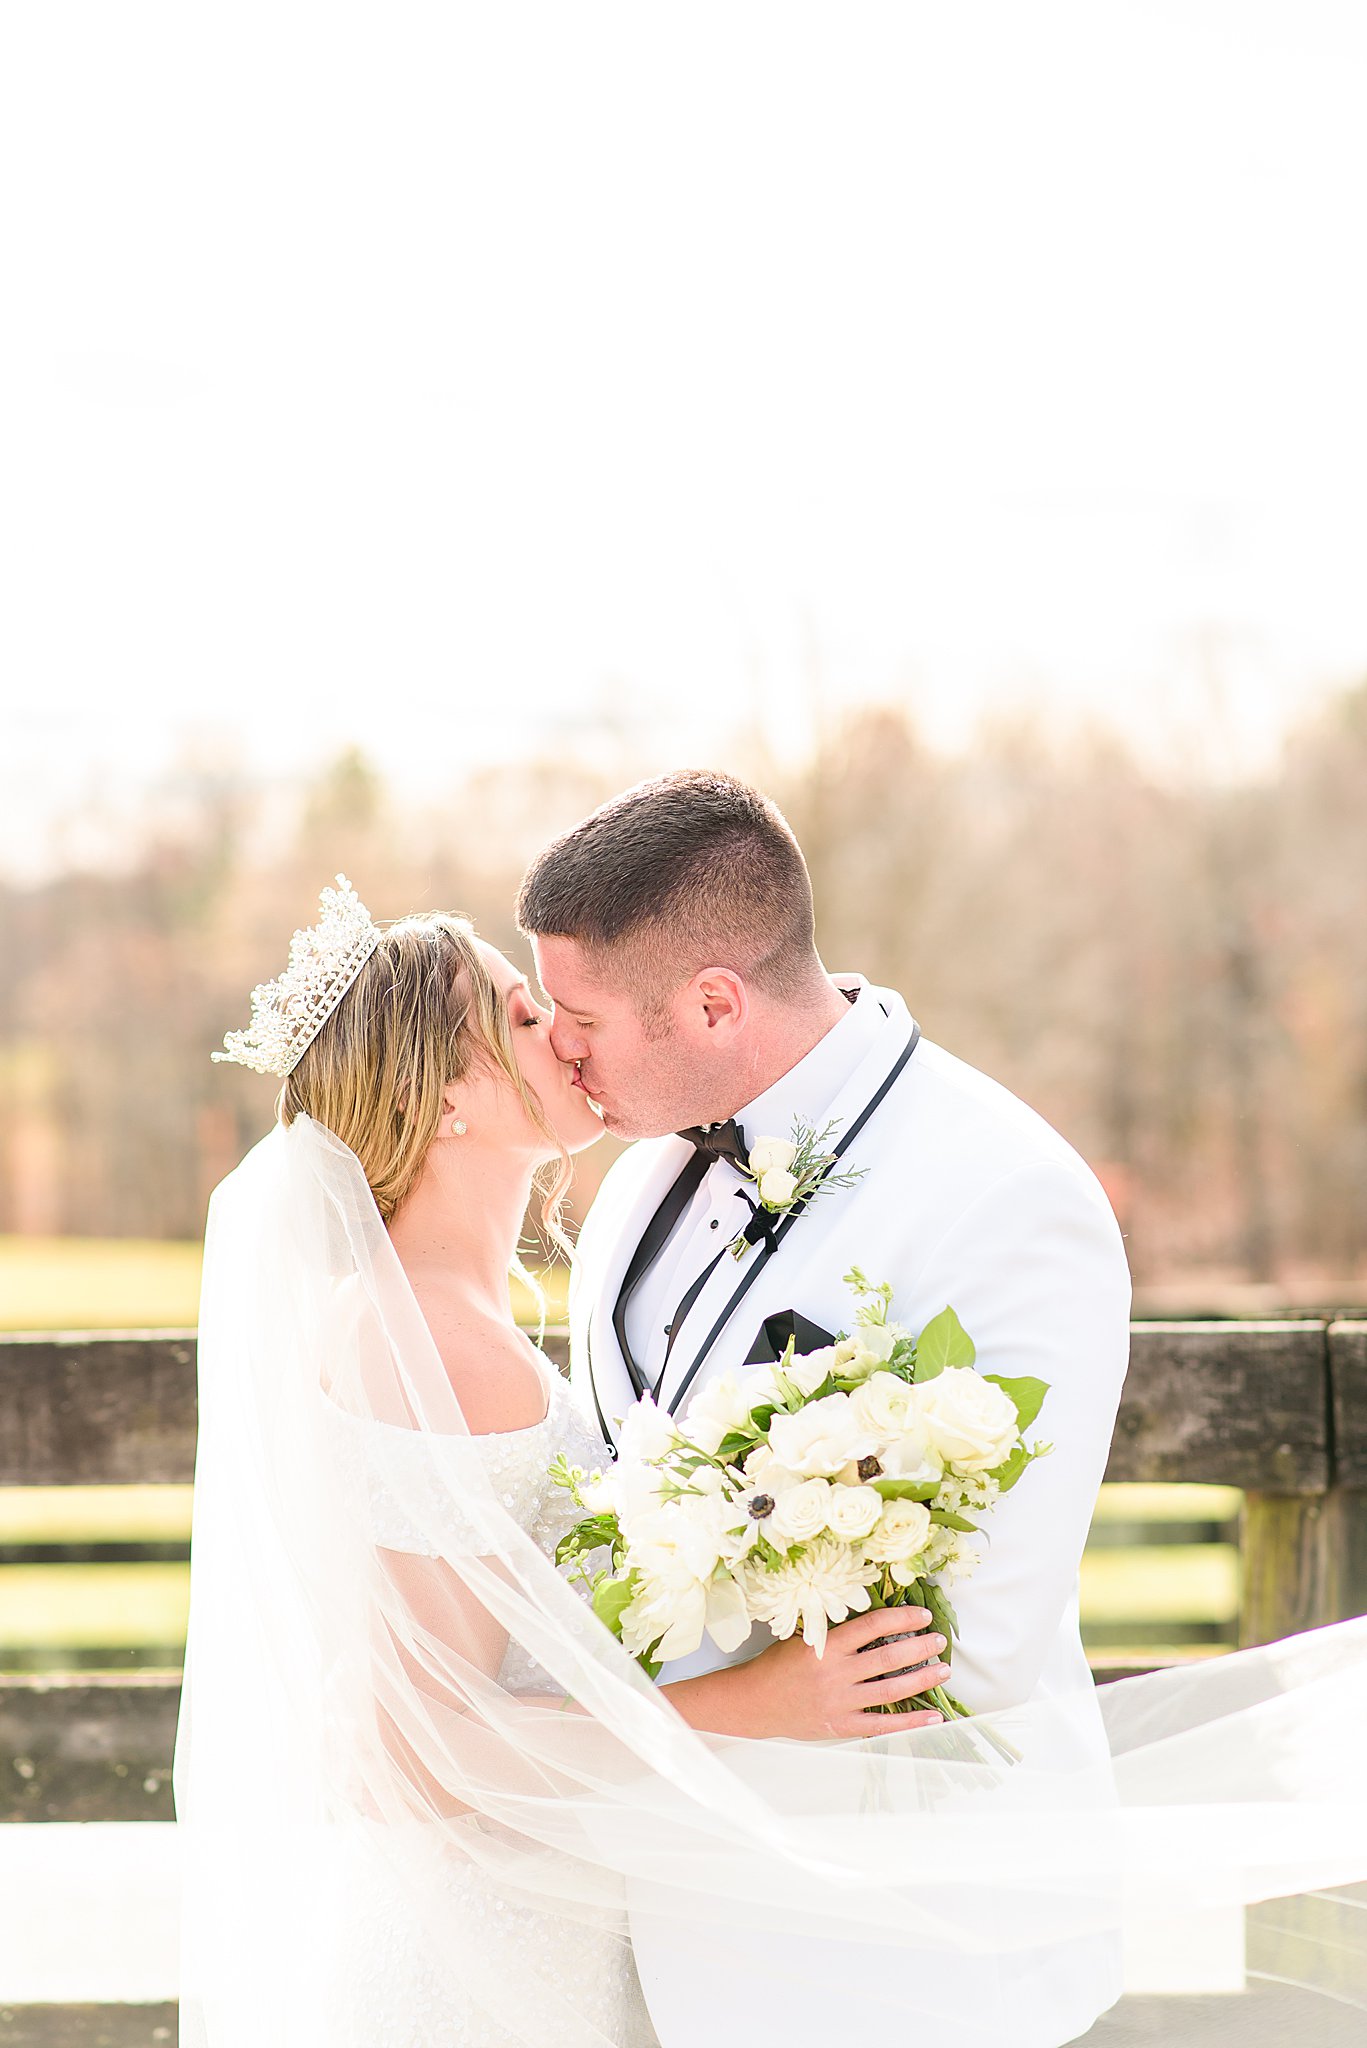 Bride and Groom kissing as veil blows around them in the wind at Mount Ida Farm wedding